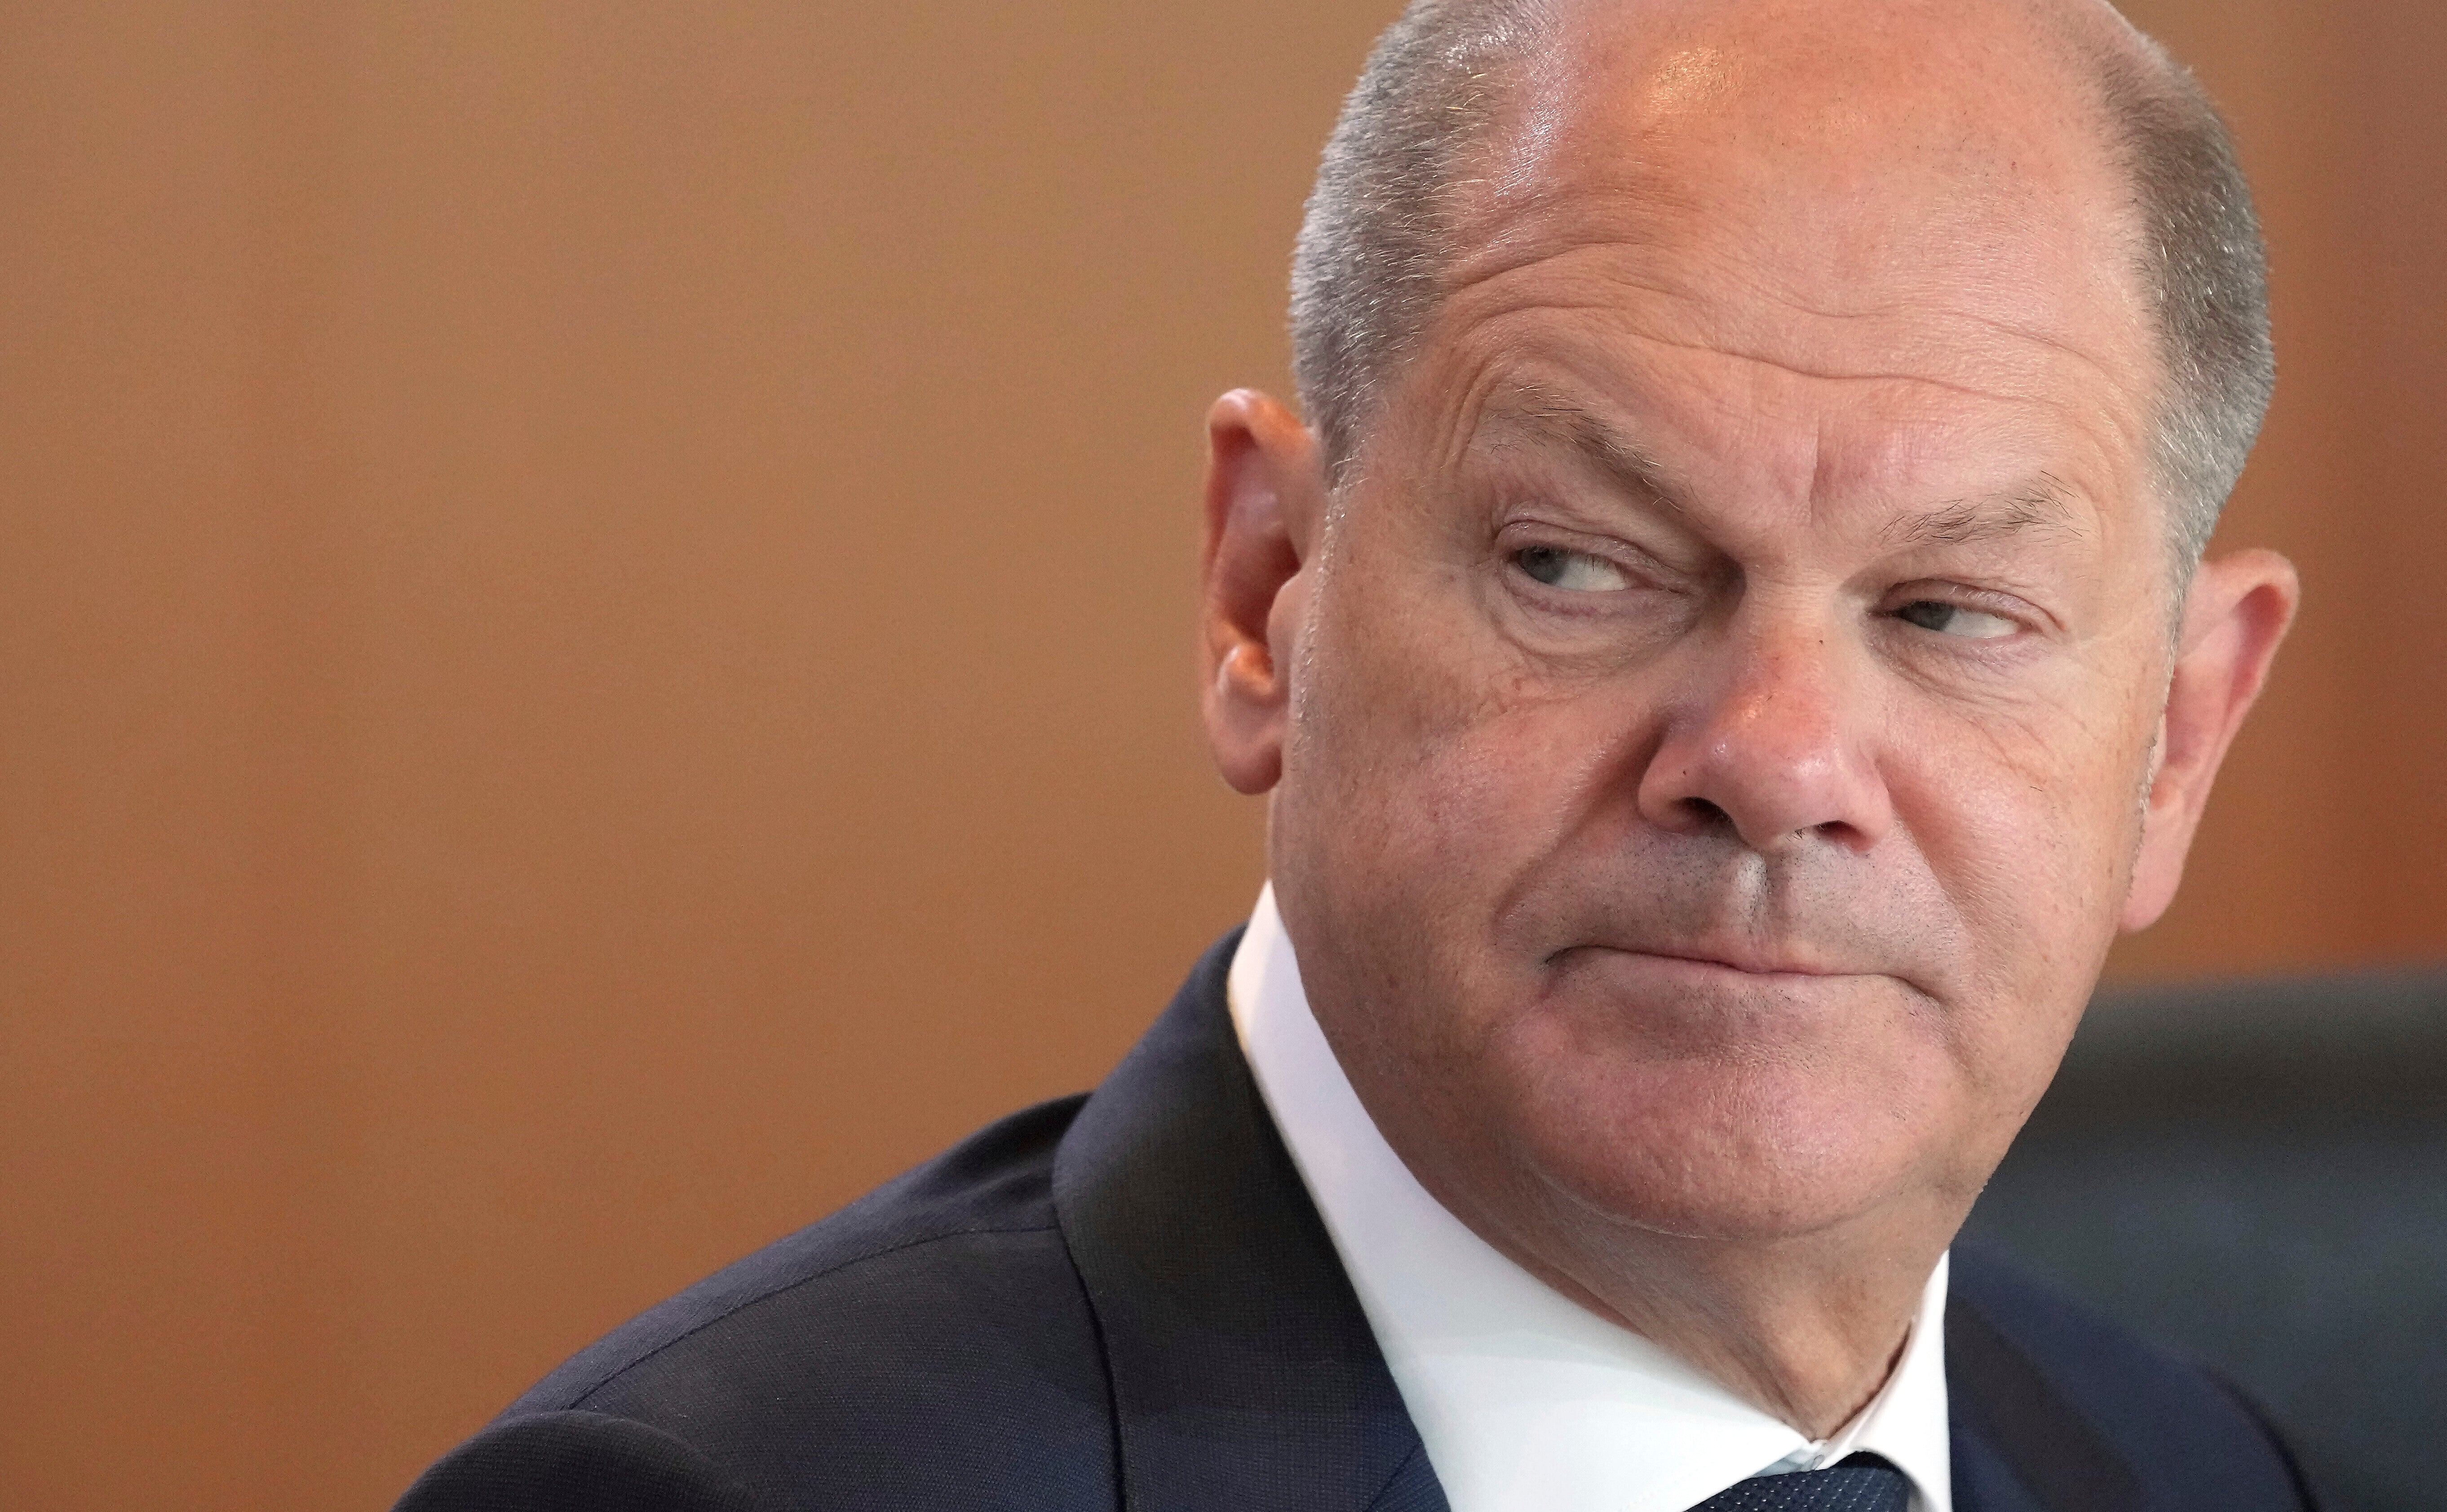 Olaf Scholz said Germany would ‘continue our support for as long as it takes’